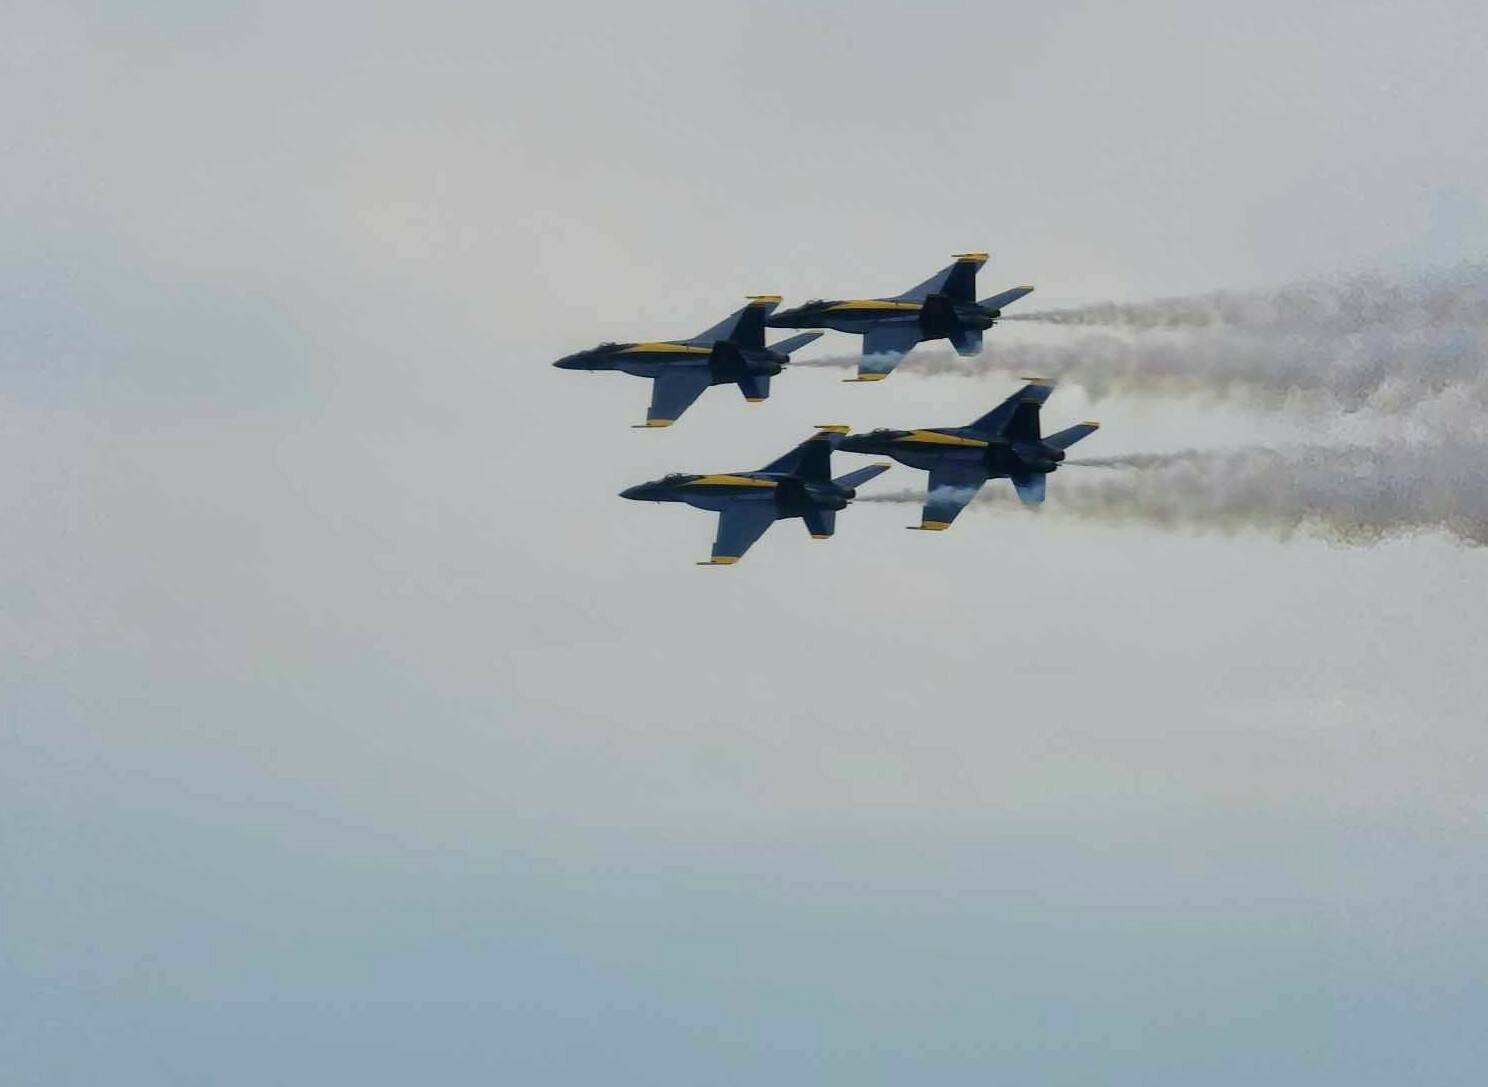 The U.S. Navy Blue Angels perform aerial maneuvers during the Boeing Seafair Airshow over the weekend of Aug. 4-6. Photo courtesy of Lindsey Tusing/ Mercer Island Police Department